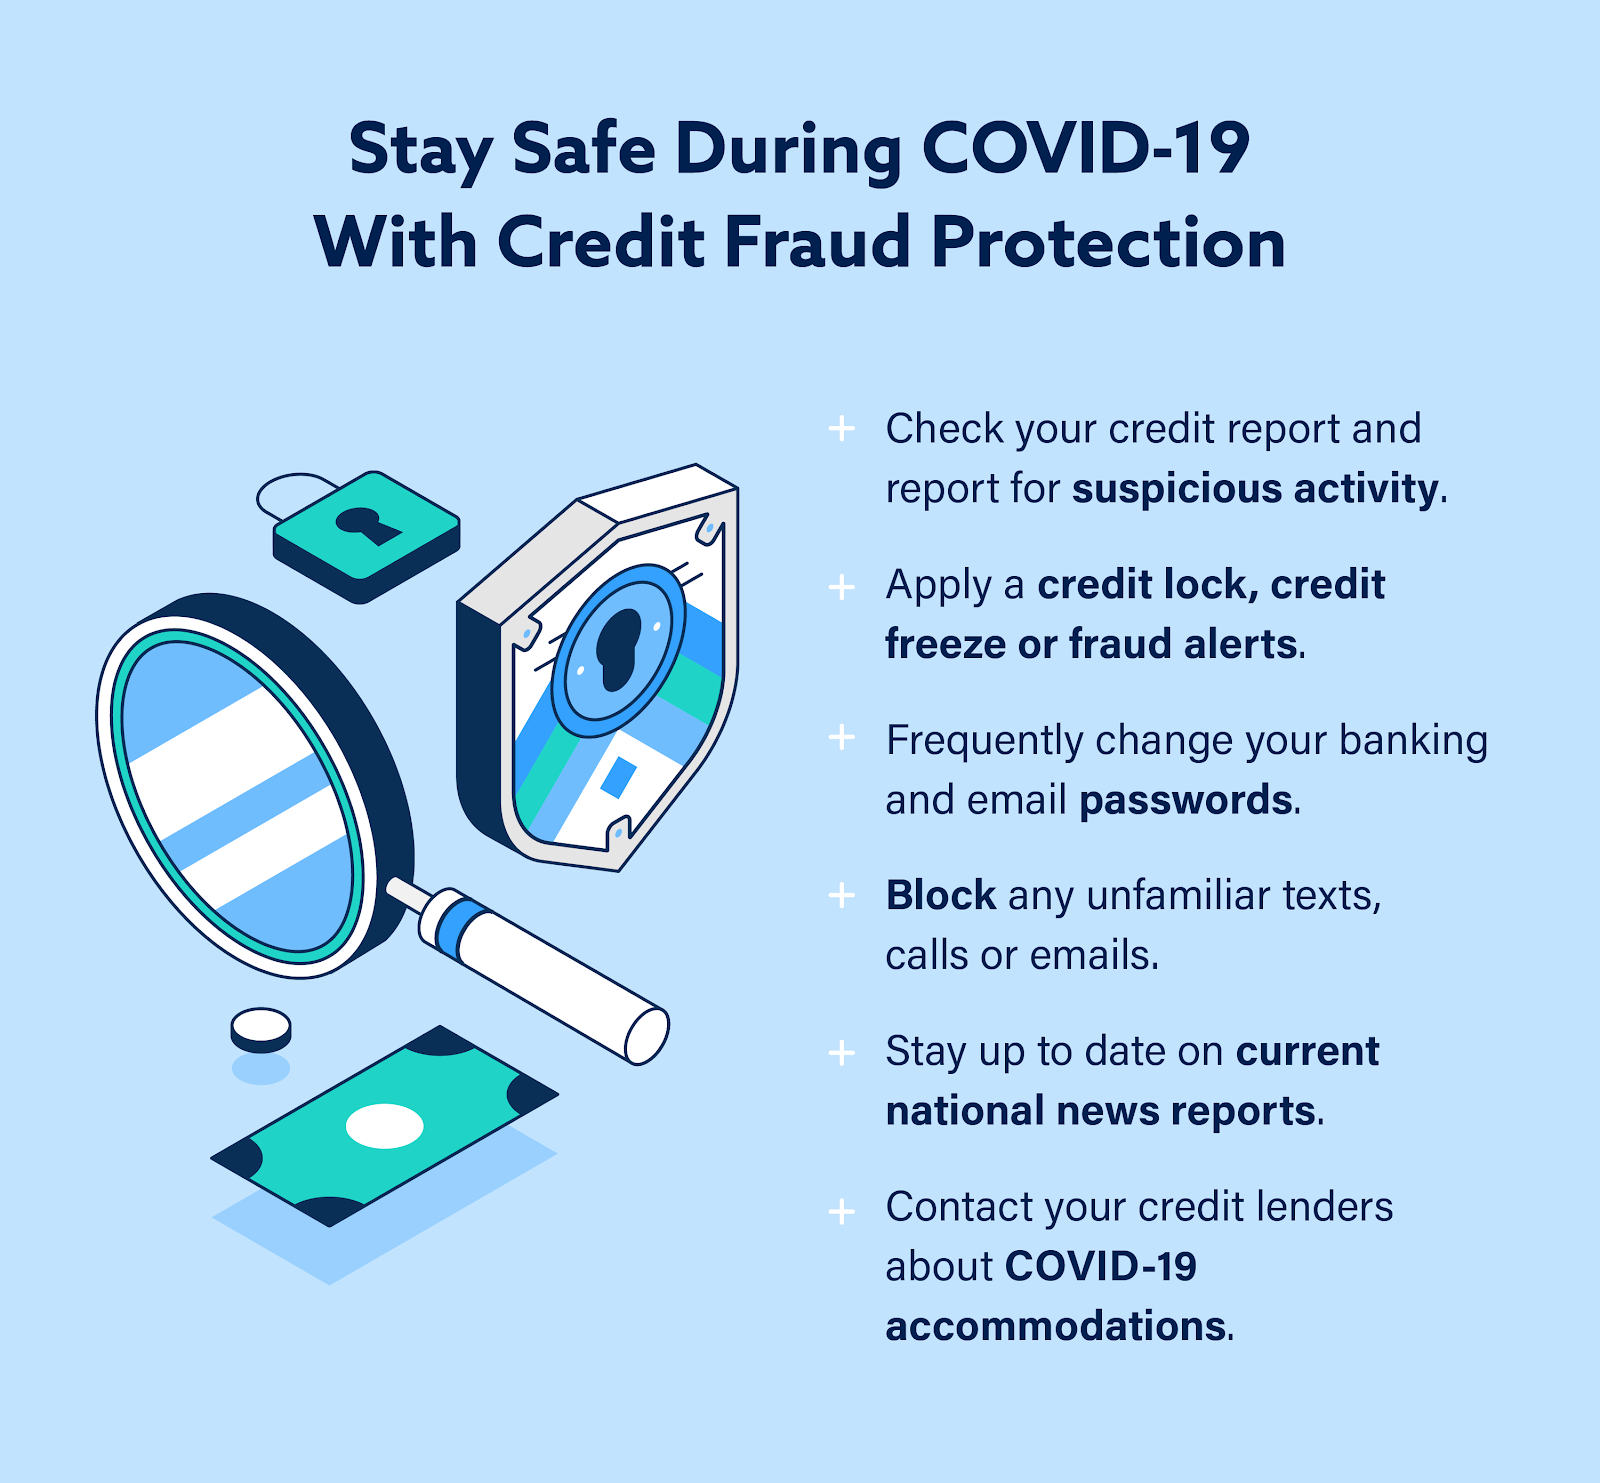 Graphic: How to Stay Safe with Credit Fraud Protection